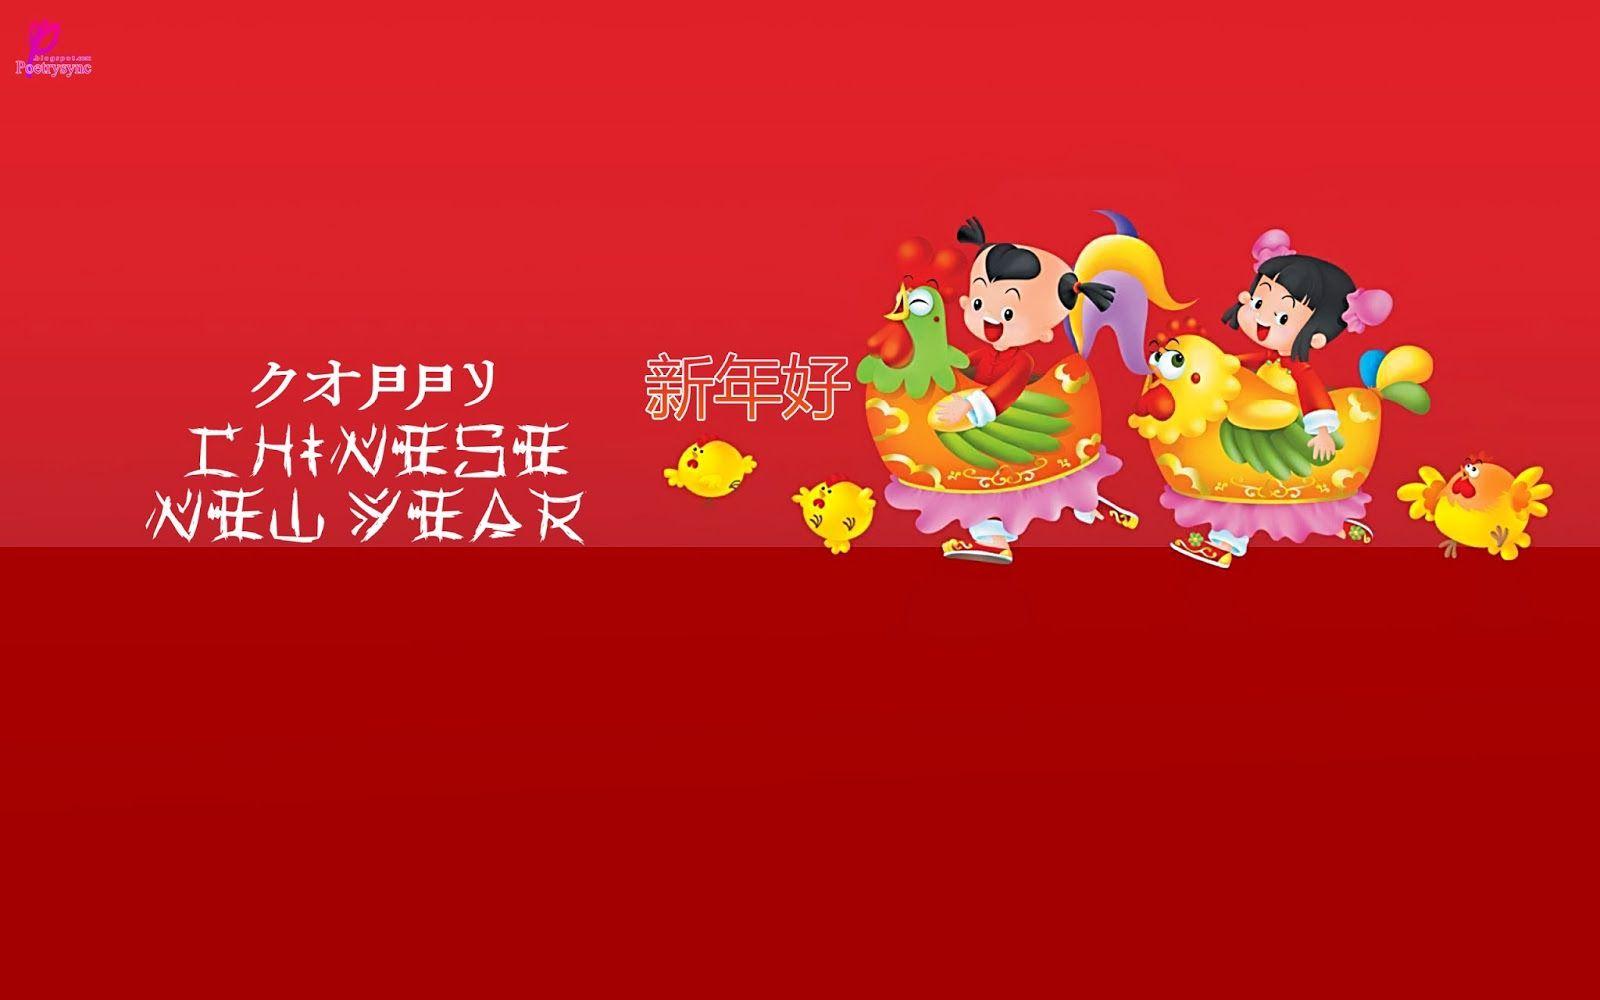 Lunar New Year HD Wallpaper Happy Chinese New Year Wishes